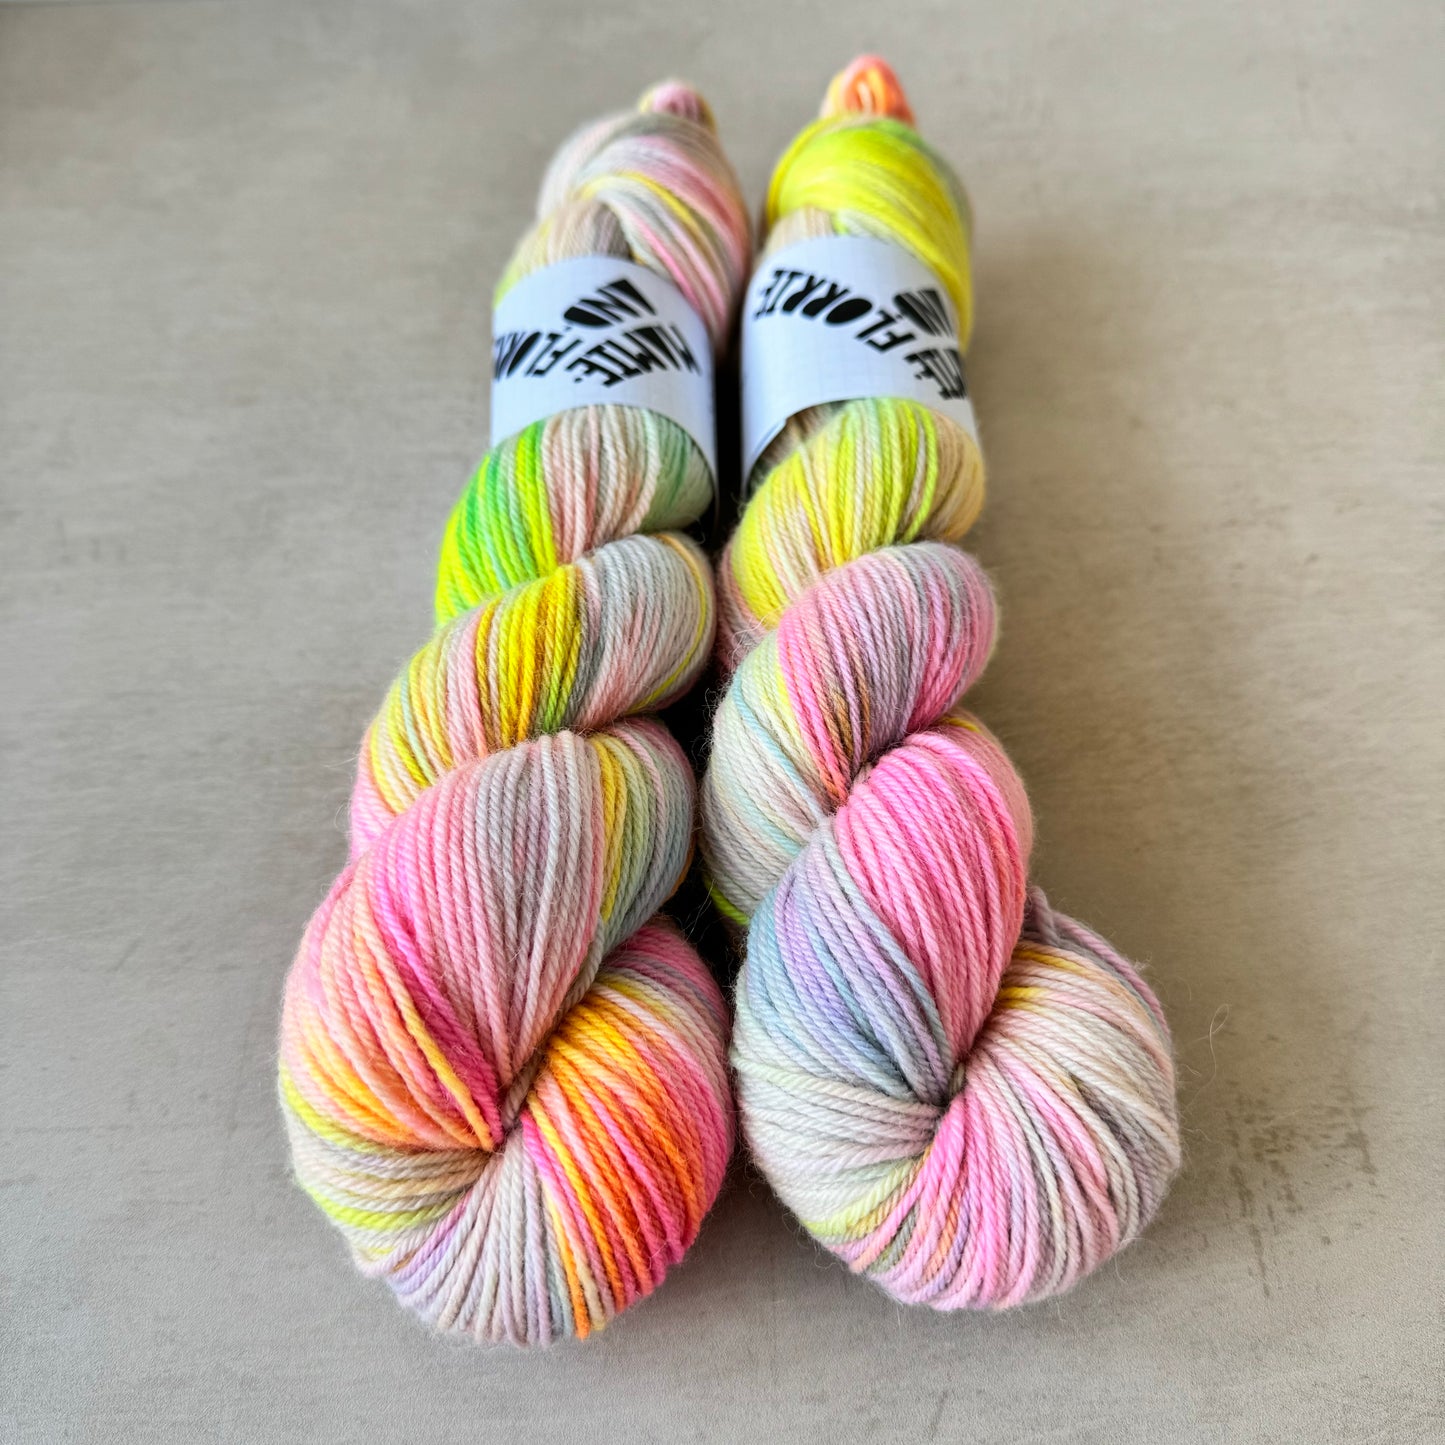 Sacre Couer - Blue Faced Leicester DK